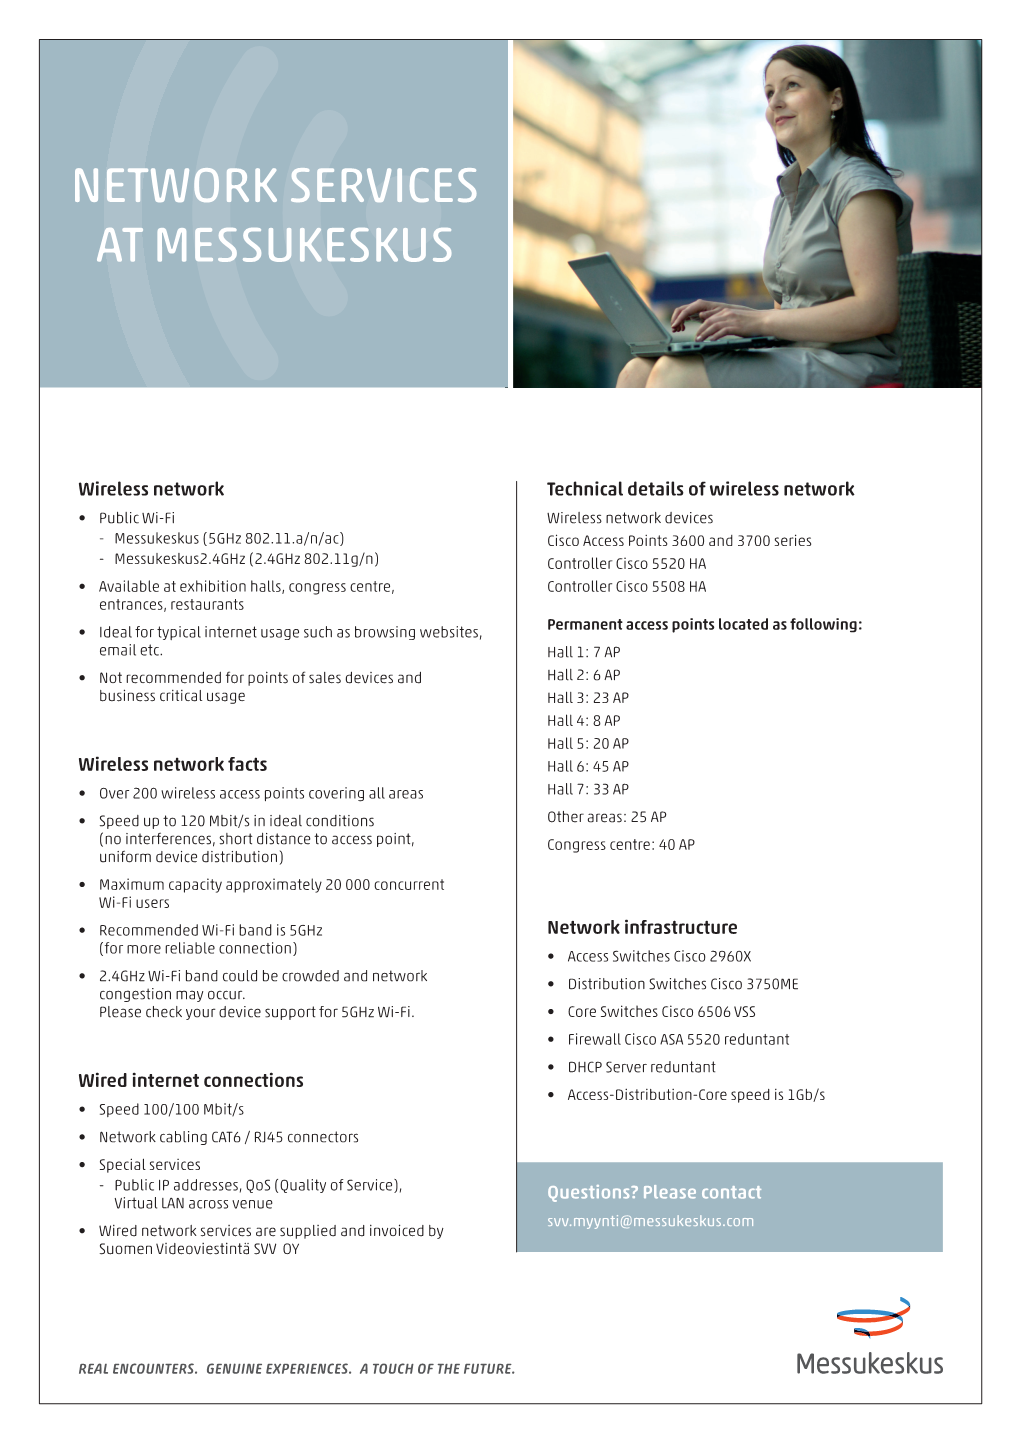 Network Services at Messukeskus